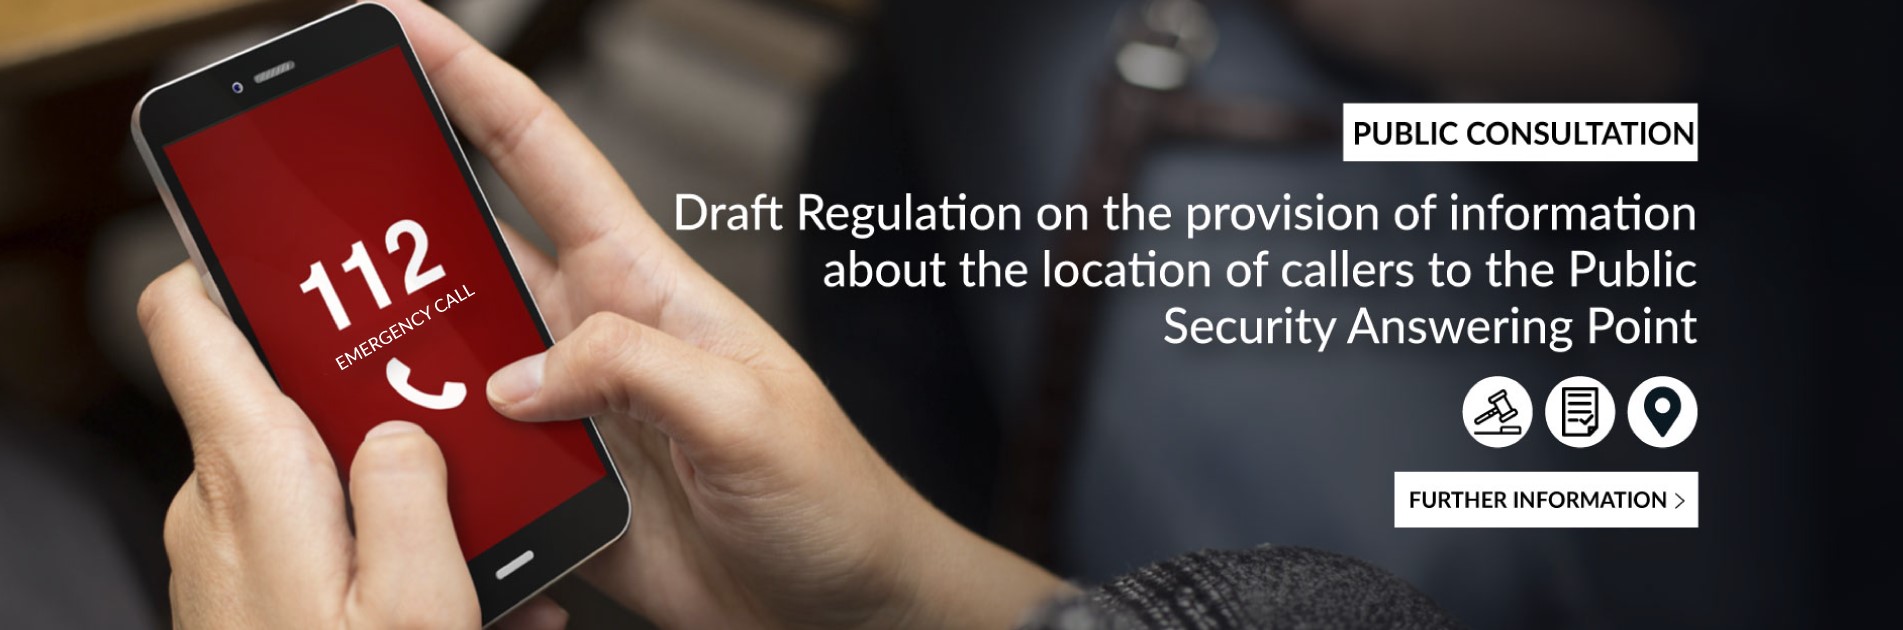 Draft Regulation on the provision of caller location information to the Public Security Answering Point